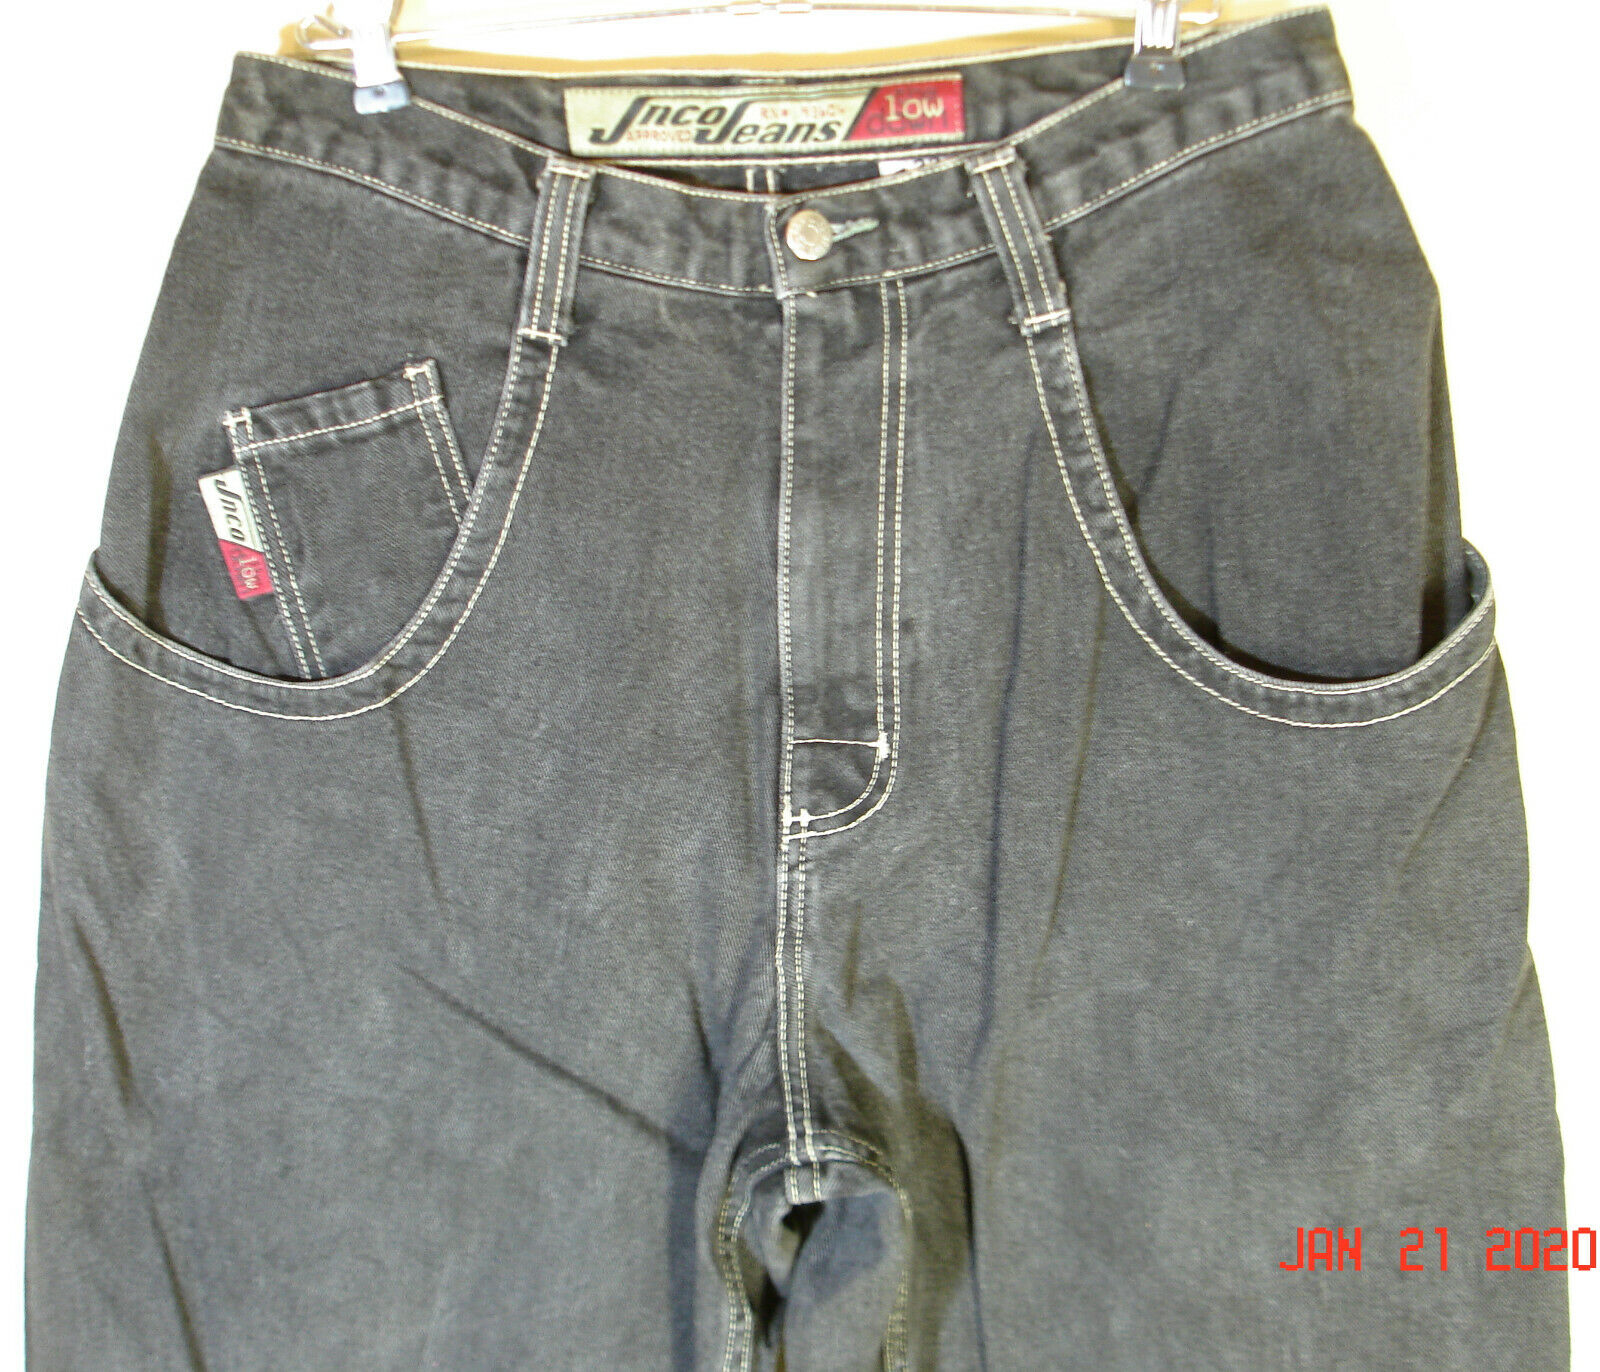 Original 1980's JnCo USA Made Classic Jeans LOW DOWN 169 20 Inch Bottoms  33W 32L